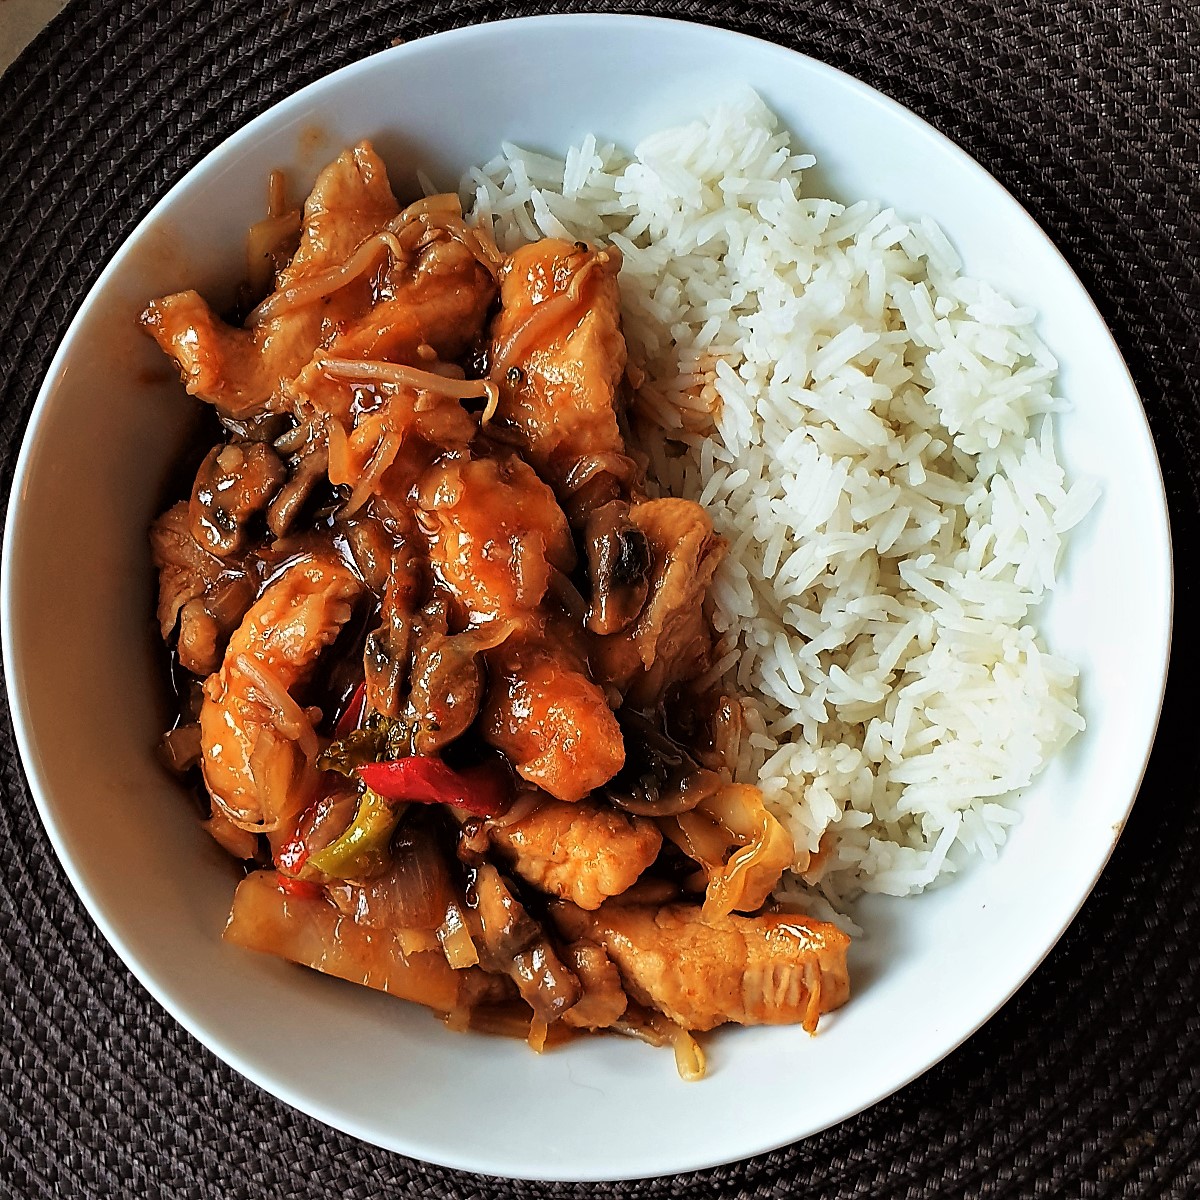 A dish of garlic chicken with rice.